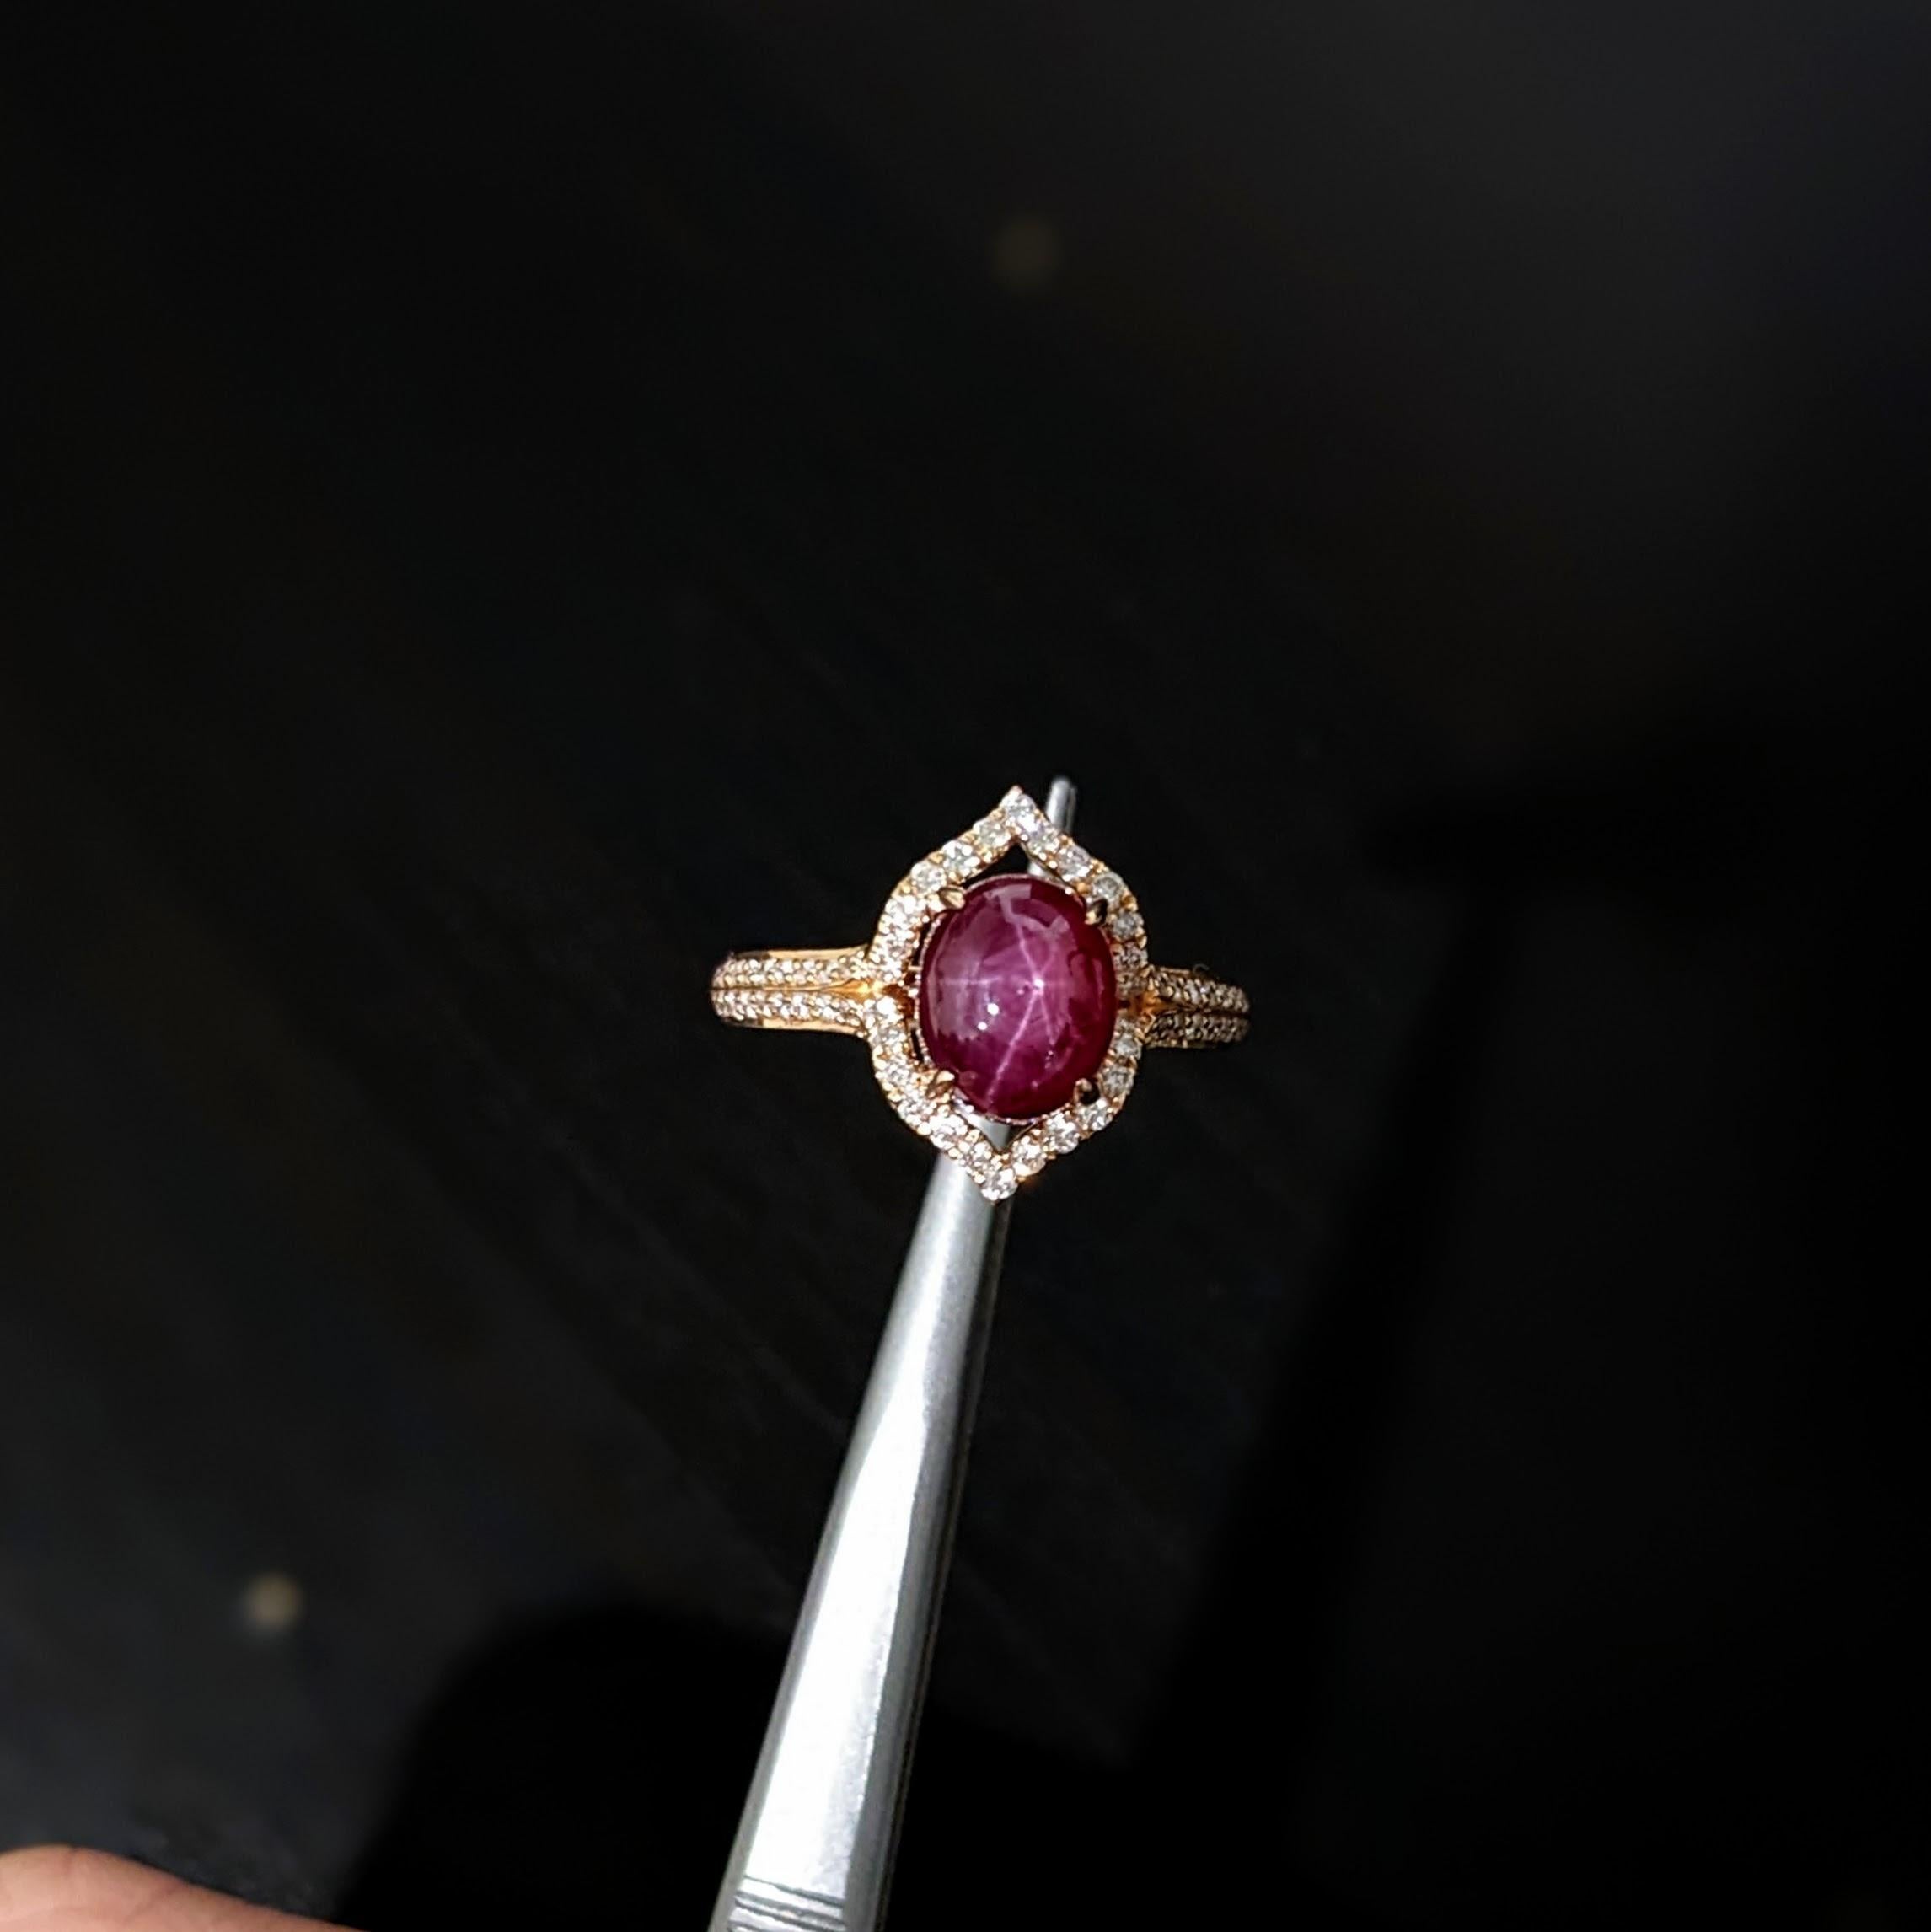 A star ruby is a type of gemstone that displays a six-rayed star when light is shone onto it. Star rubies are unique and mystical gemstones. This art deco style ring features a stunning 2.03 carat oval star ruby gemstone in a single prong setting